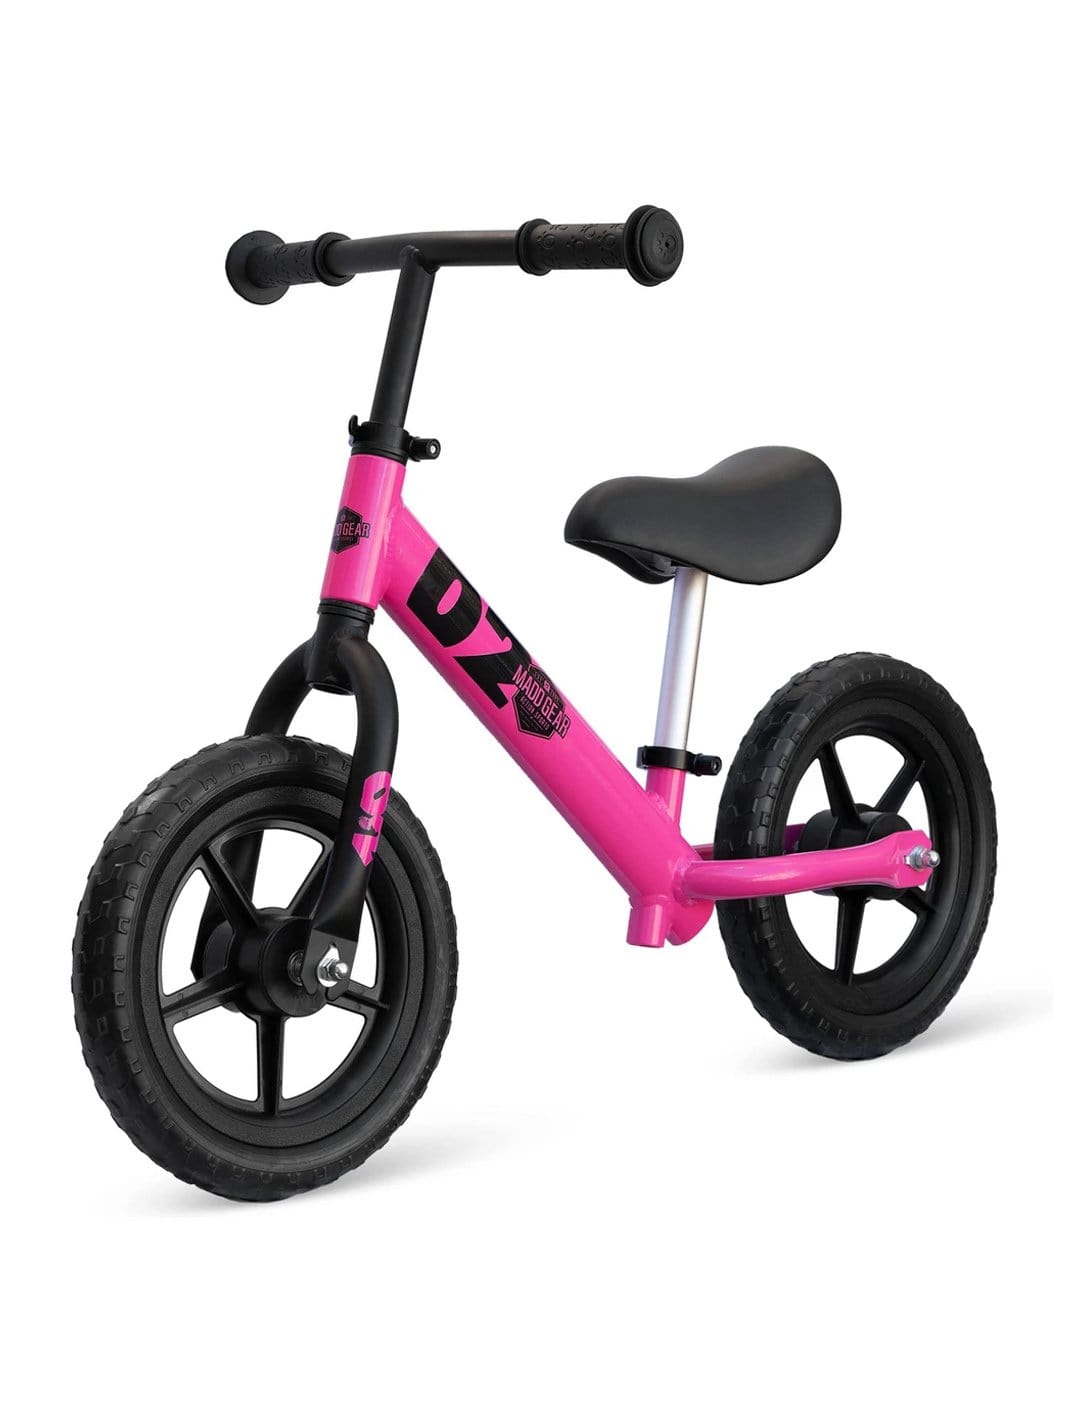 Madd Gear Girls Toddler Kids Balance Bike Bicycle Foot to Floor Learn Ride